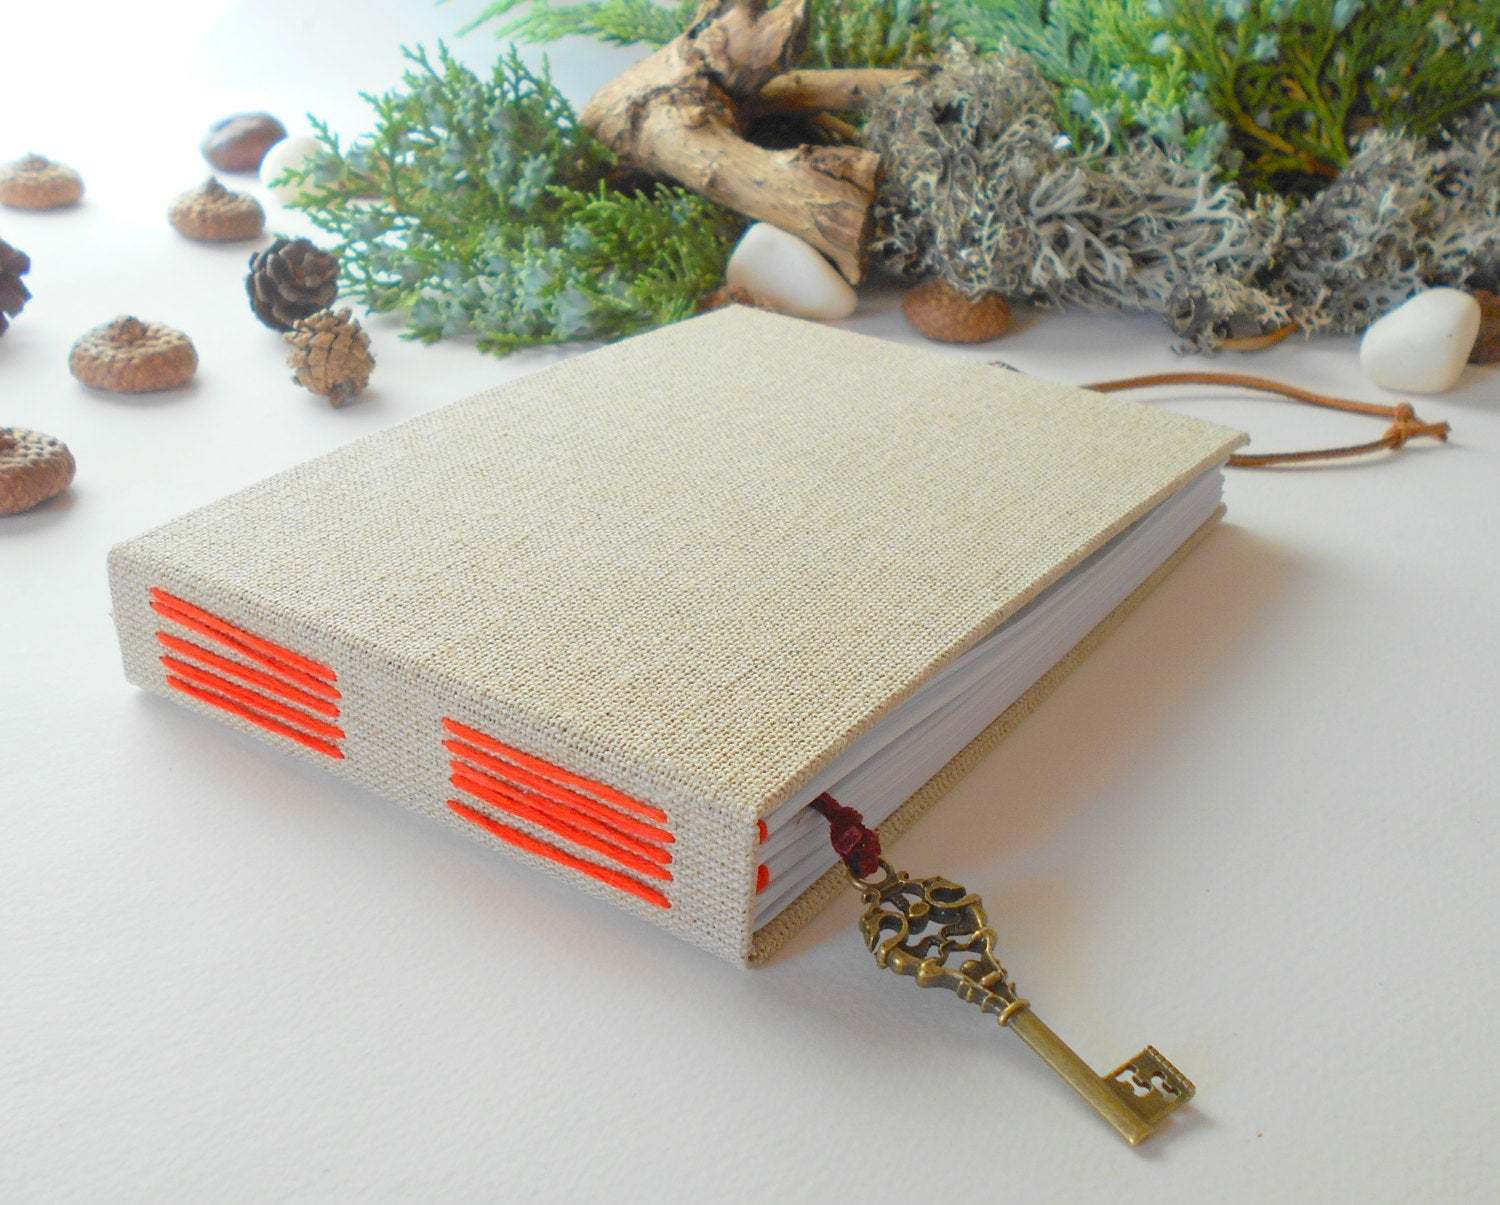 Handmade travel sketchbook journal with fabric hardcovers covers, skeleton key bookmark- eco-friendly blank book with linen fabric wrapping and 100% recycled page sheets